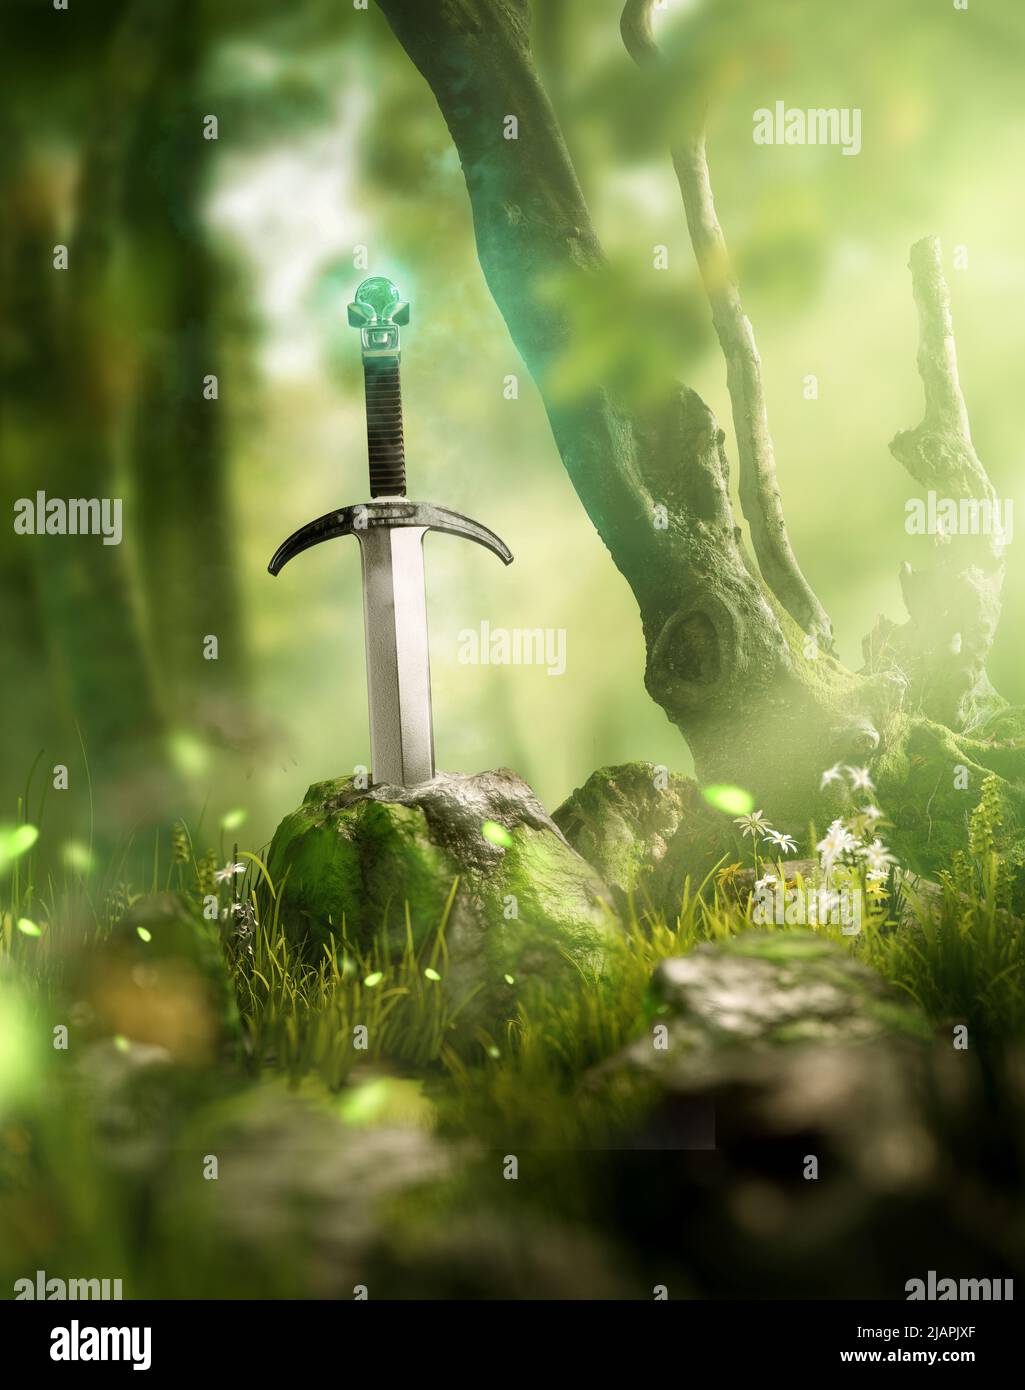 A legendary ancient sword lost in the undergrowth of a forest. 3D illustration. Stock Photo